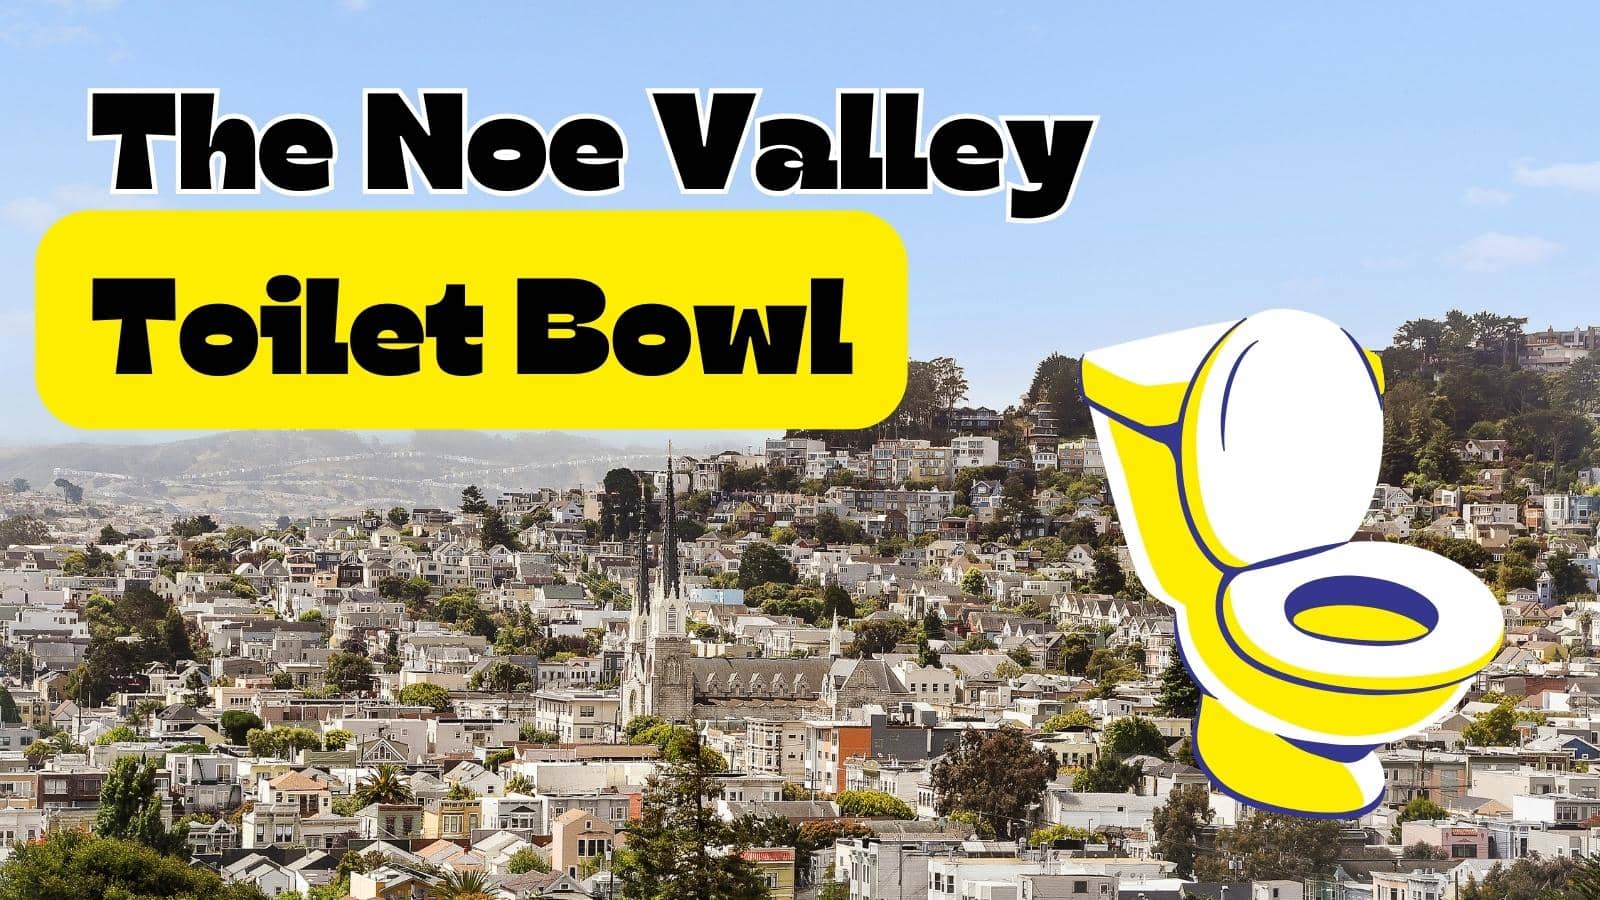 the noe valley toilet bowl community event real estate (1)